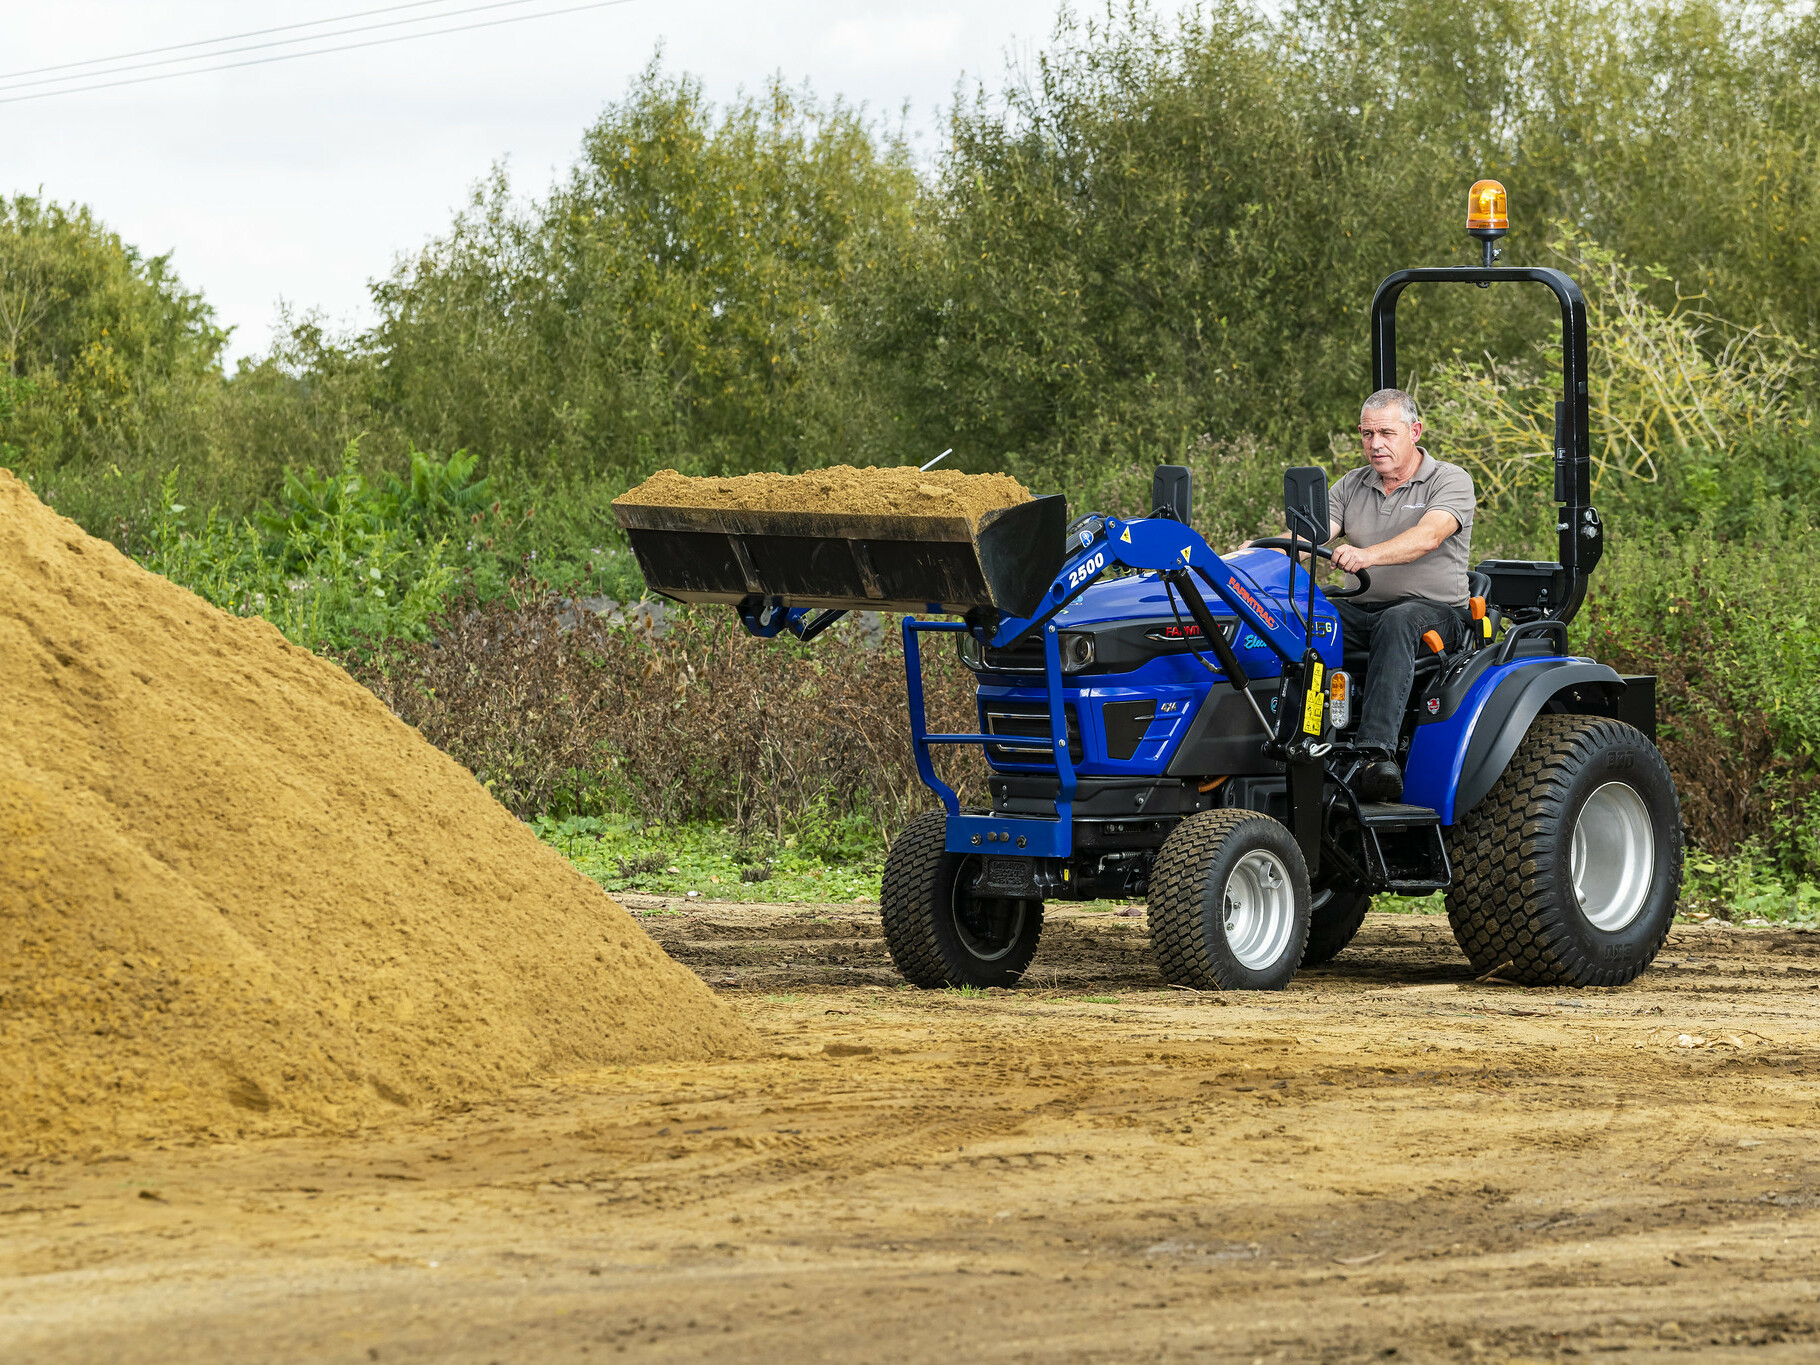 The Farmtrac FT25G being used to transport sand in a front-loader attachment.